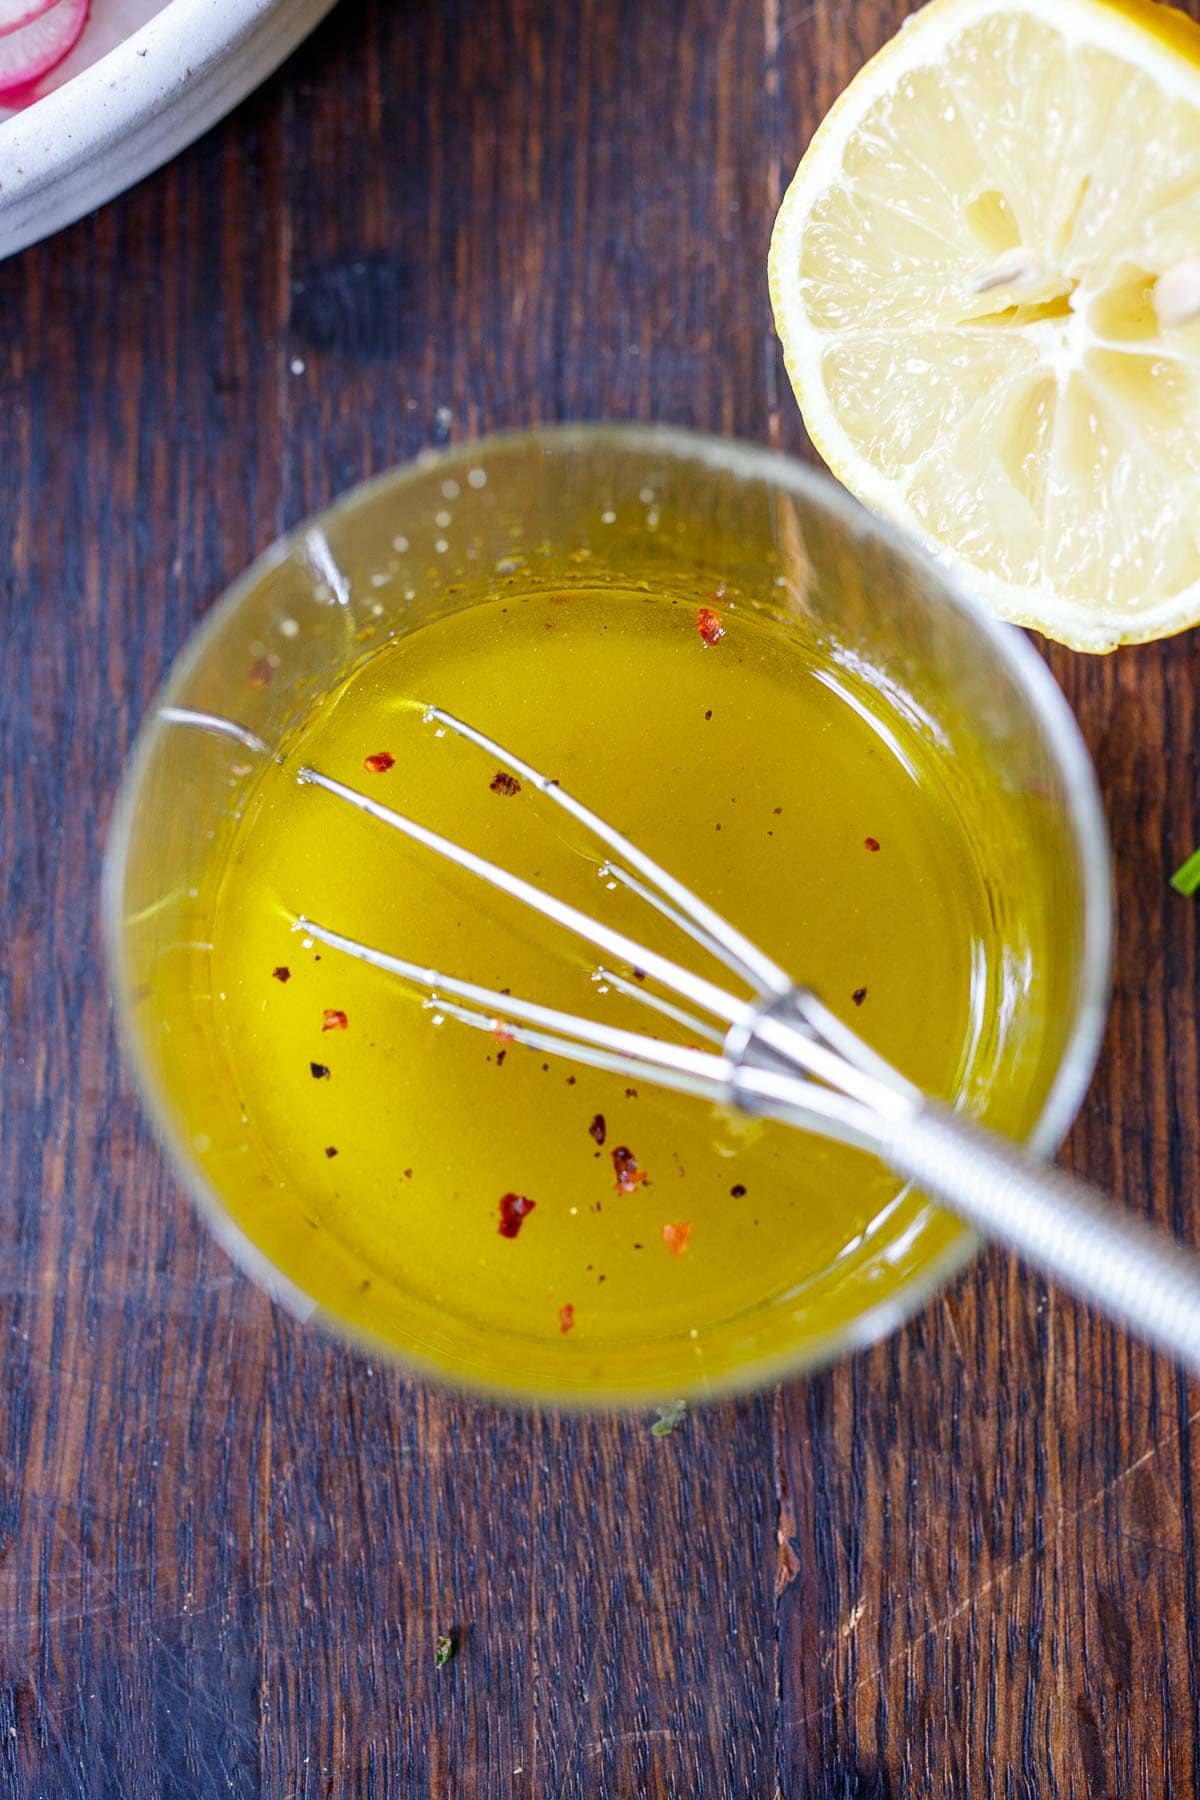 whisk in a jar of oil and citrus dressing with red pepper flakes.